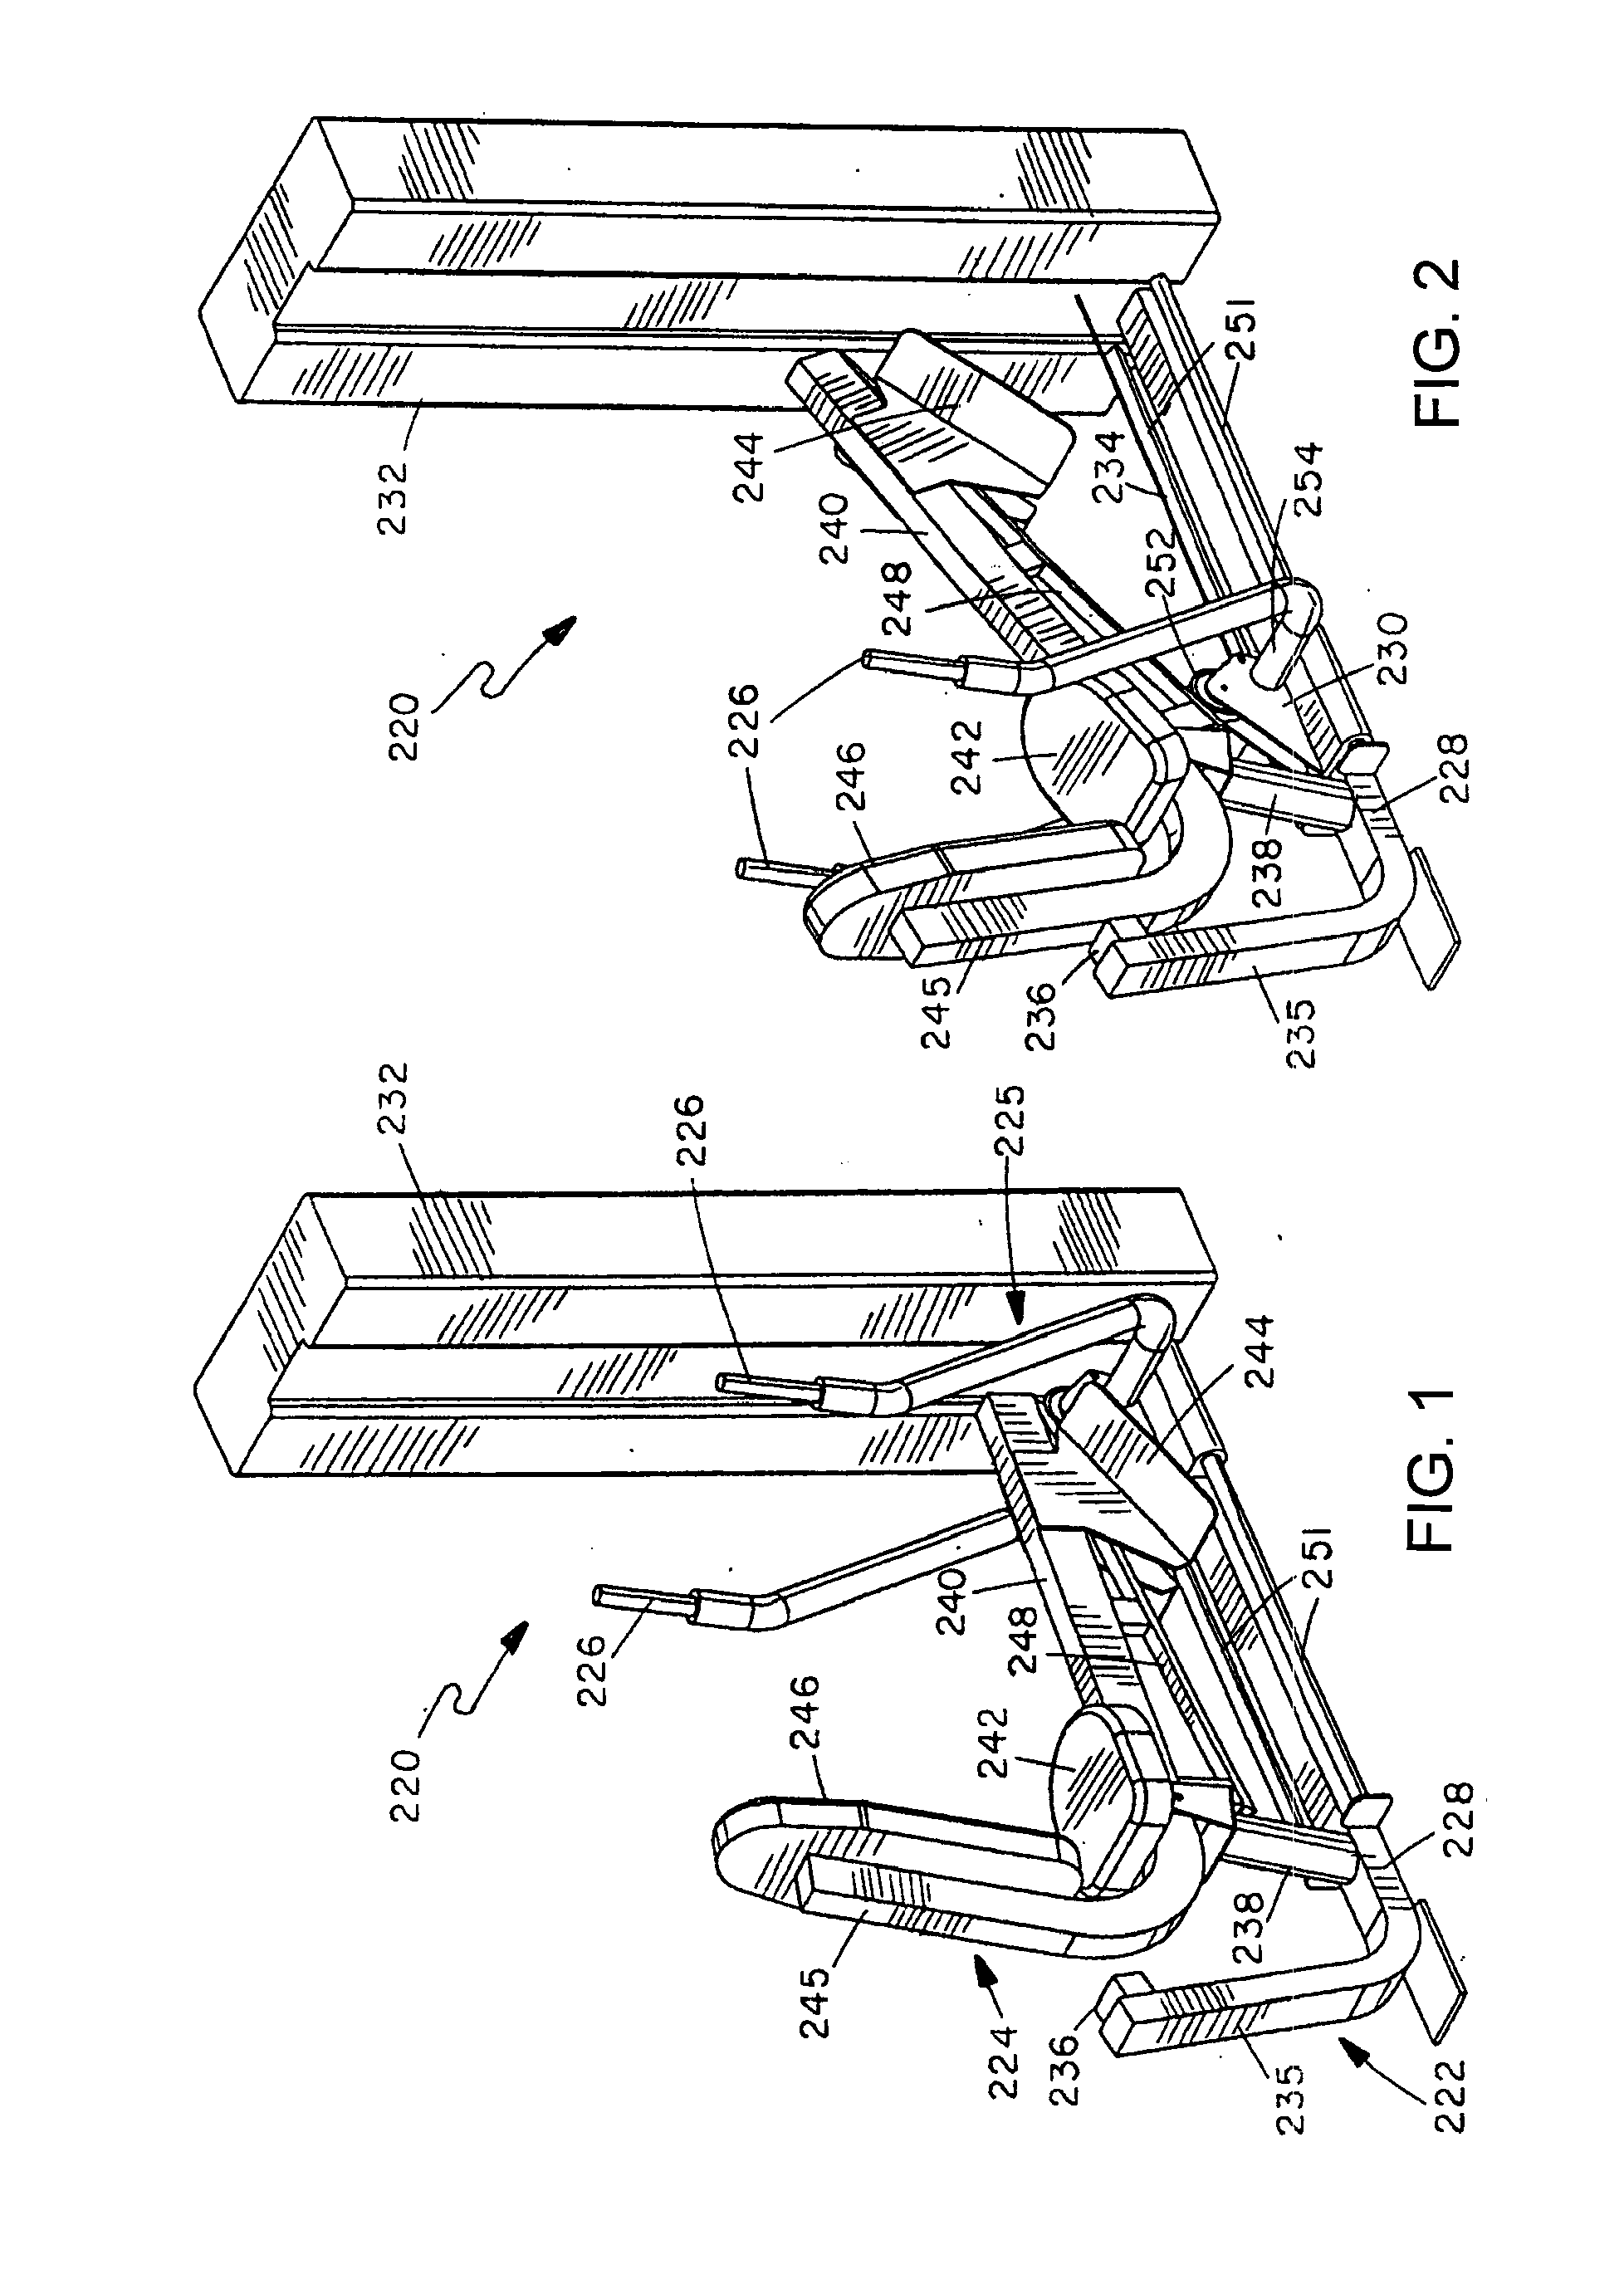 Rowing exercise machine with self-aligning pivoting user support